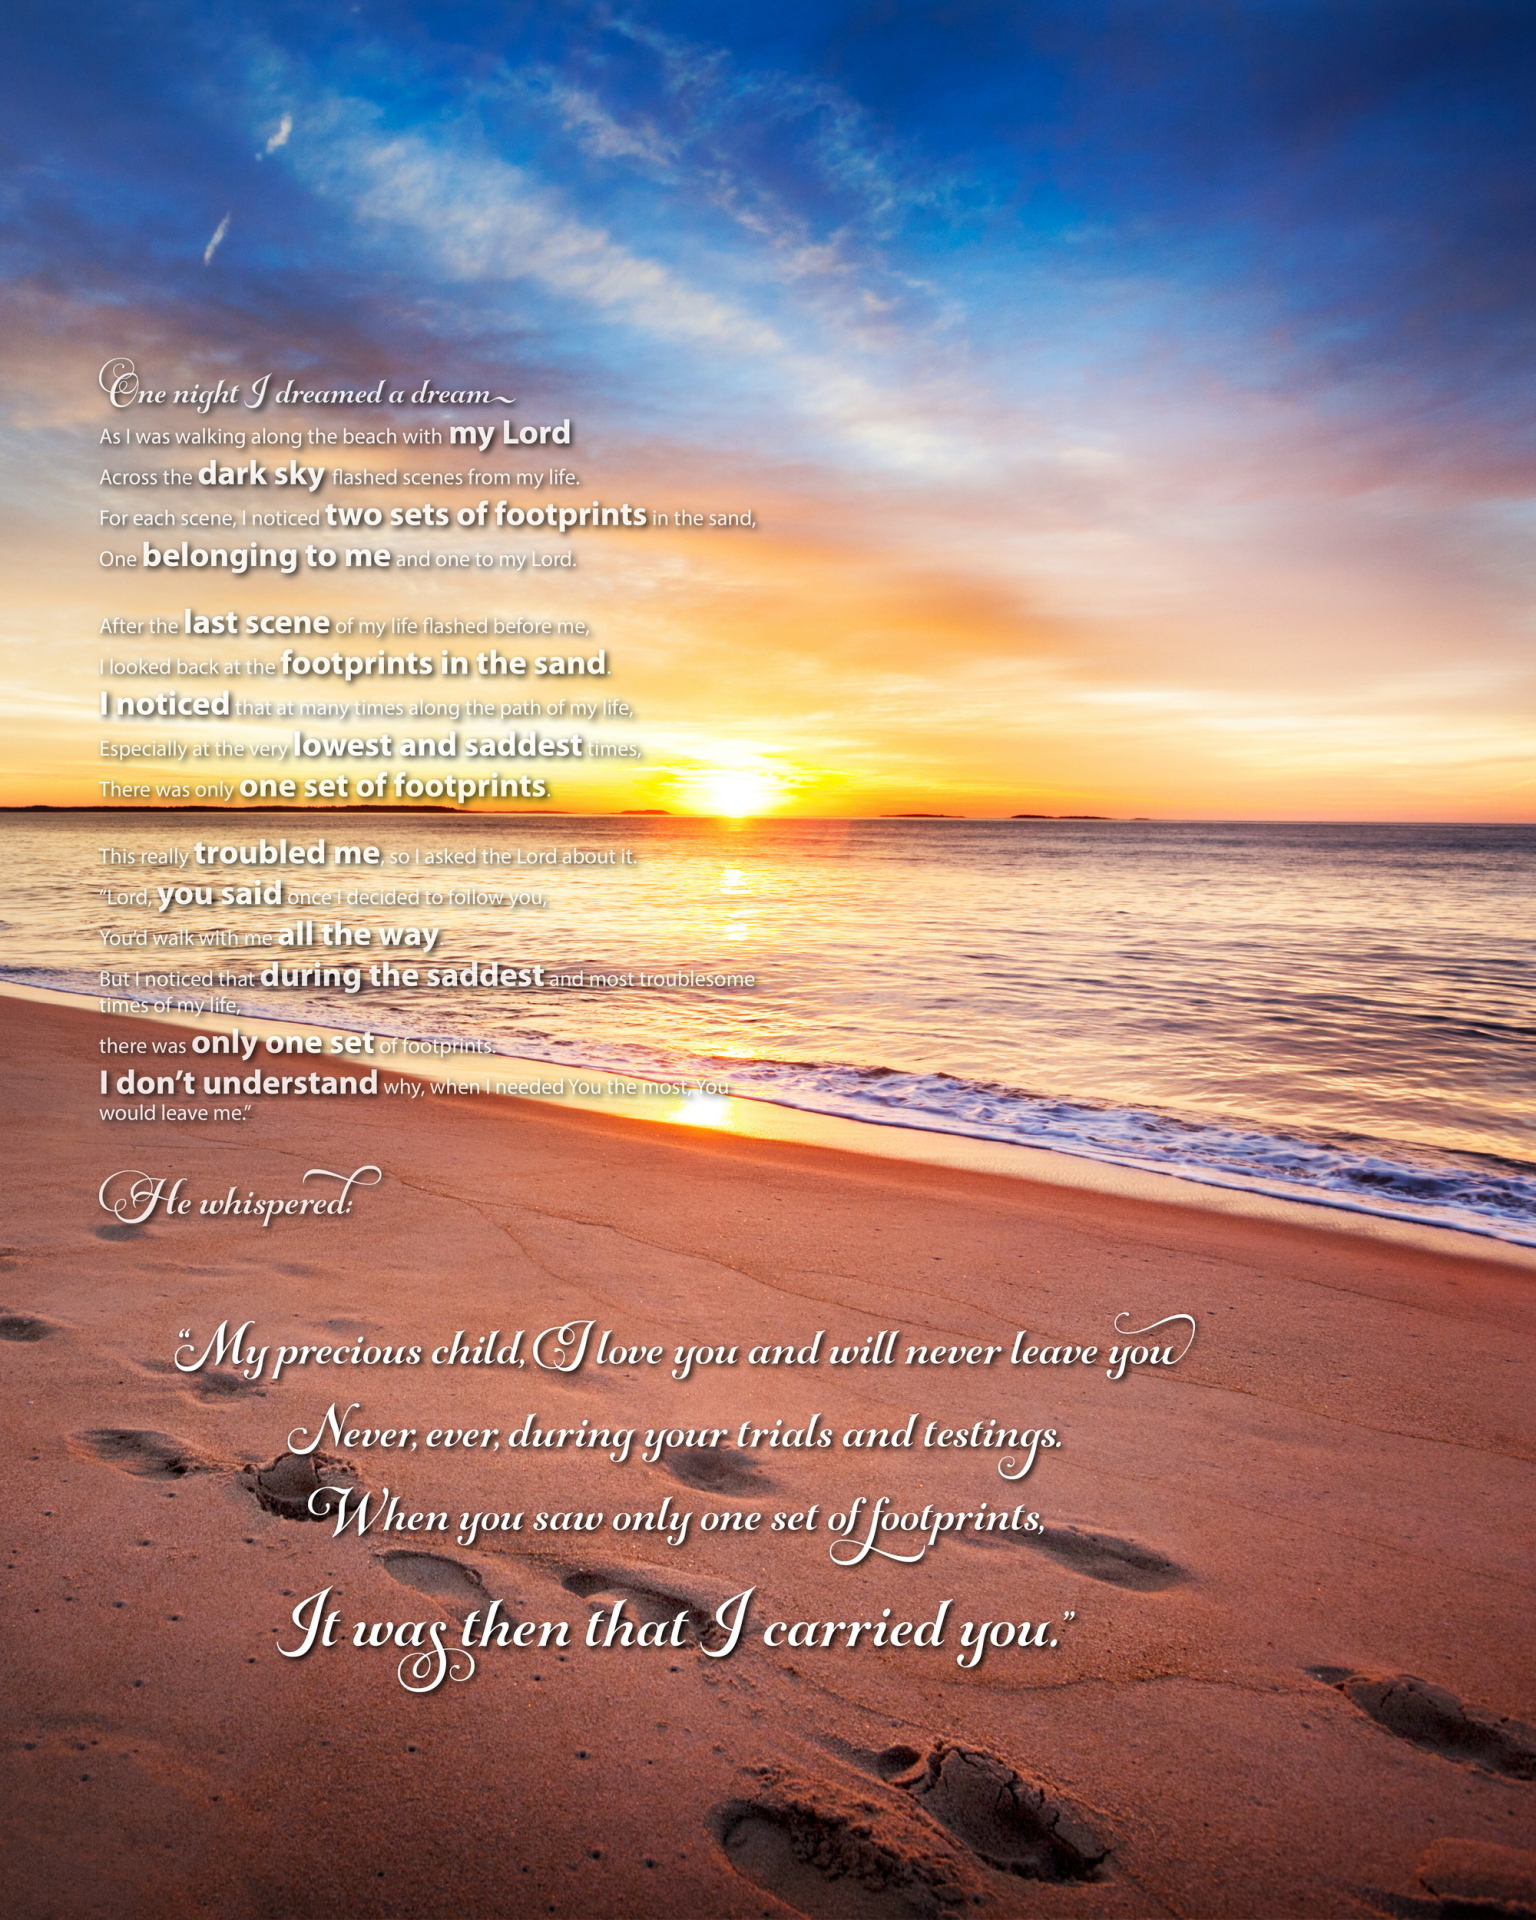 Footprints in the Sand Poem | Beautiful Poem from Only the Bible.com